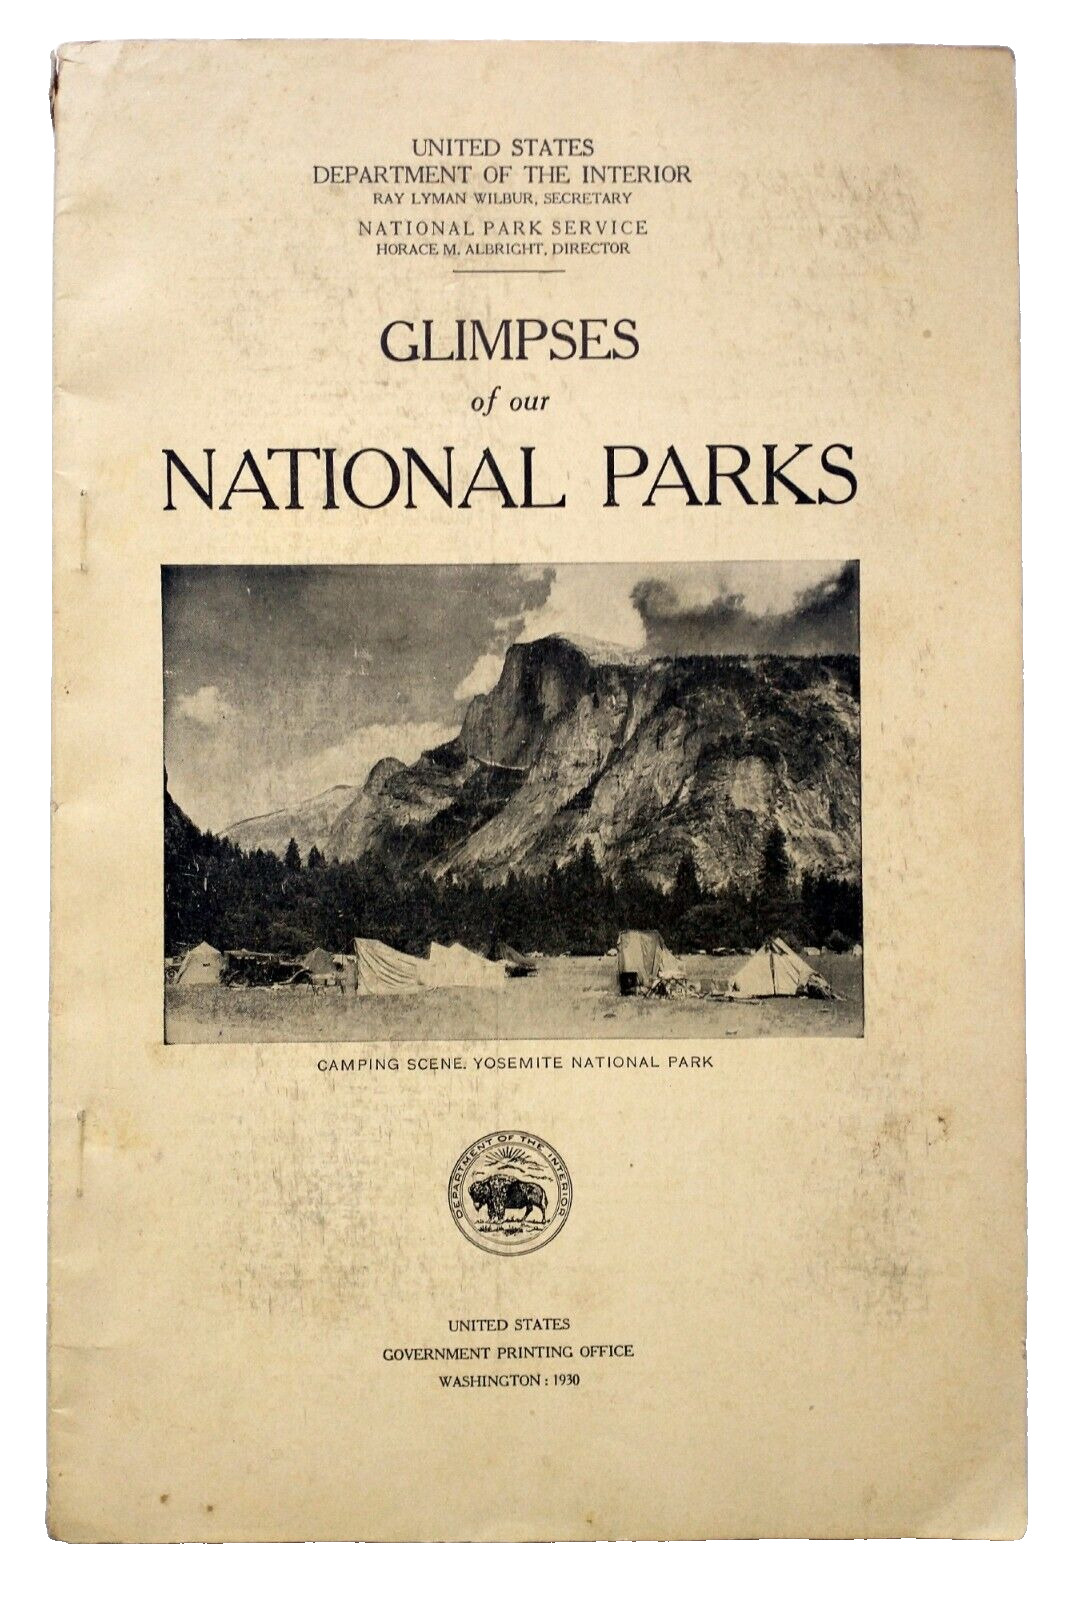 Glimpses Of Our National Parks United States Department Of The Interior 1930